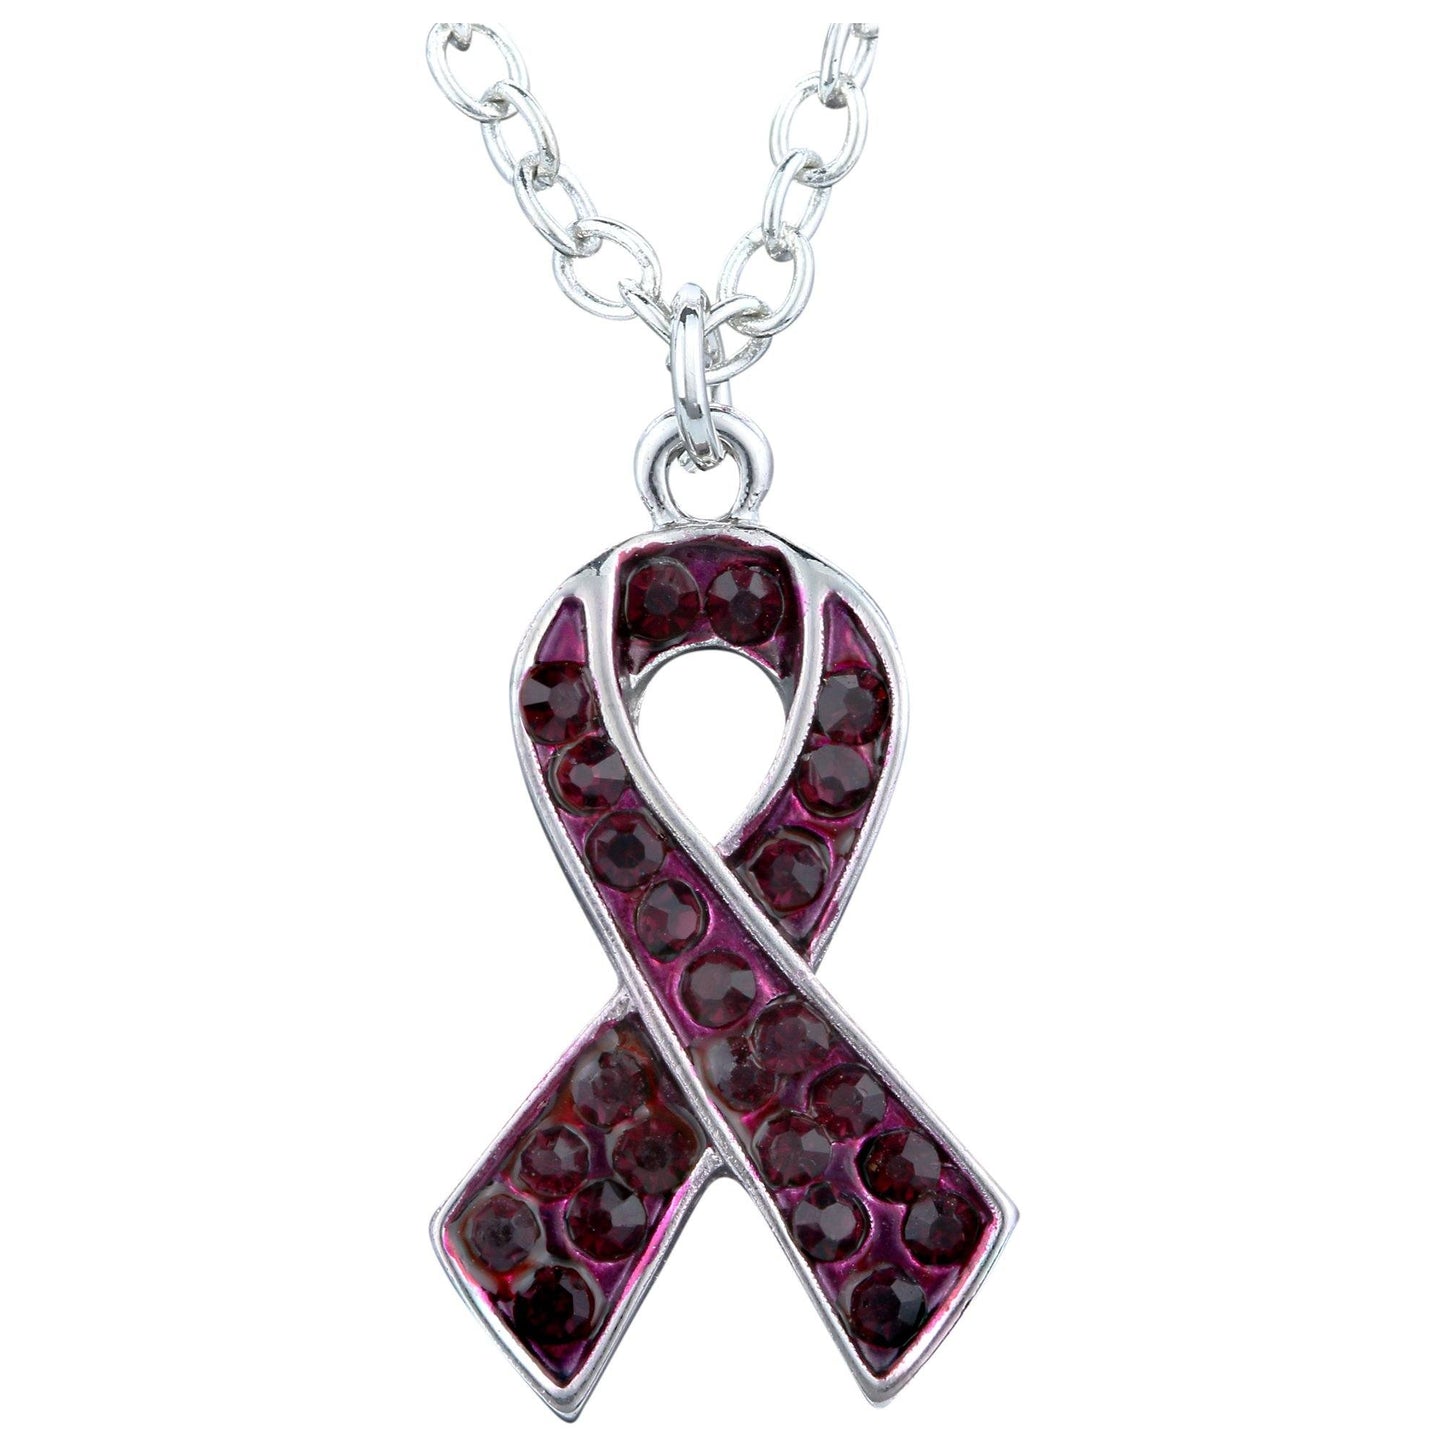 Save Memories Share Hope&trade; Alzheimer's Necklace!